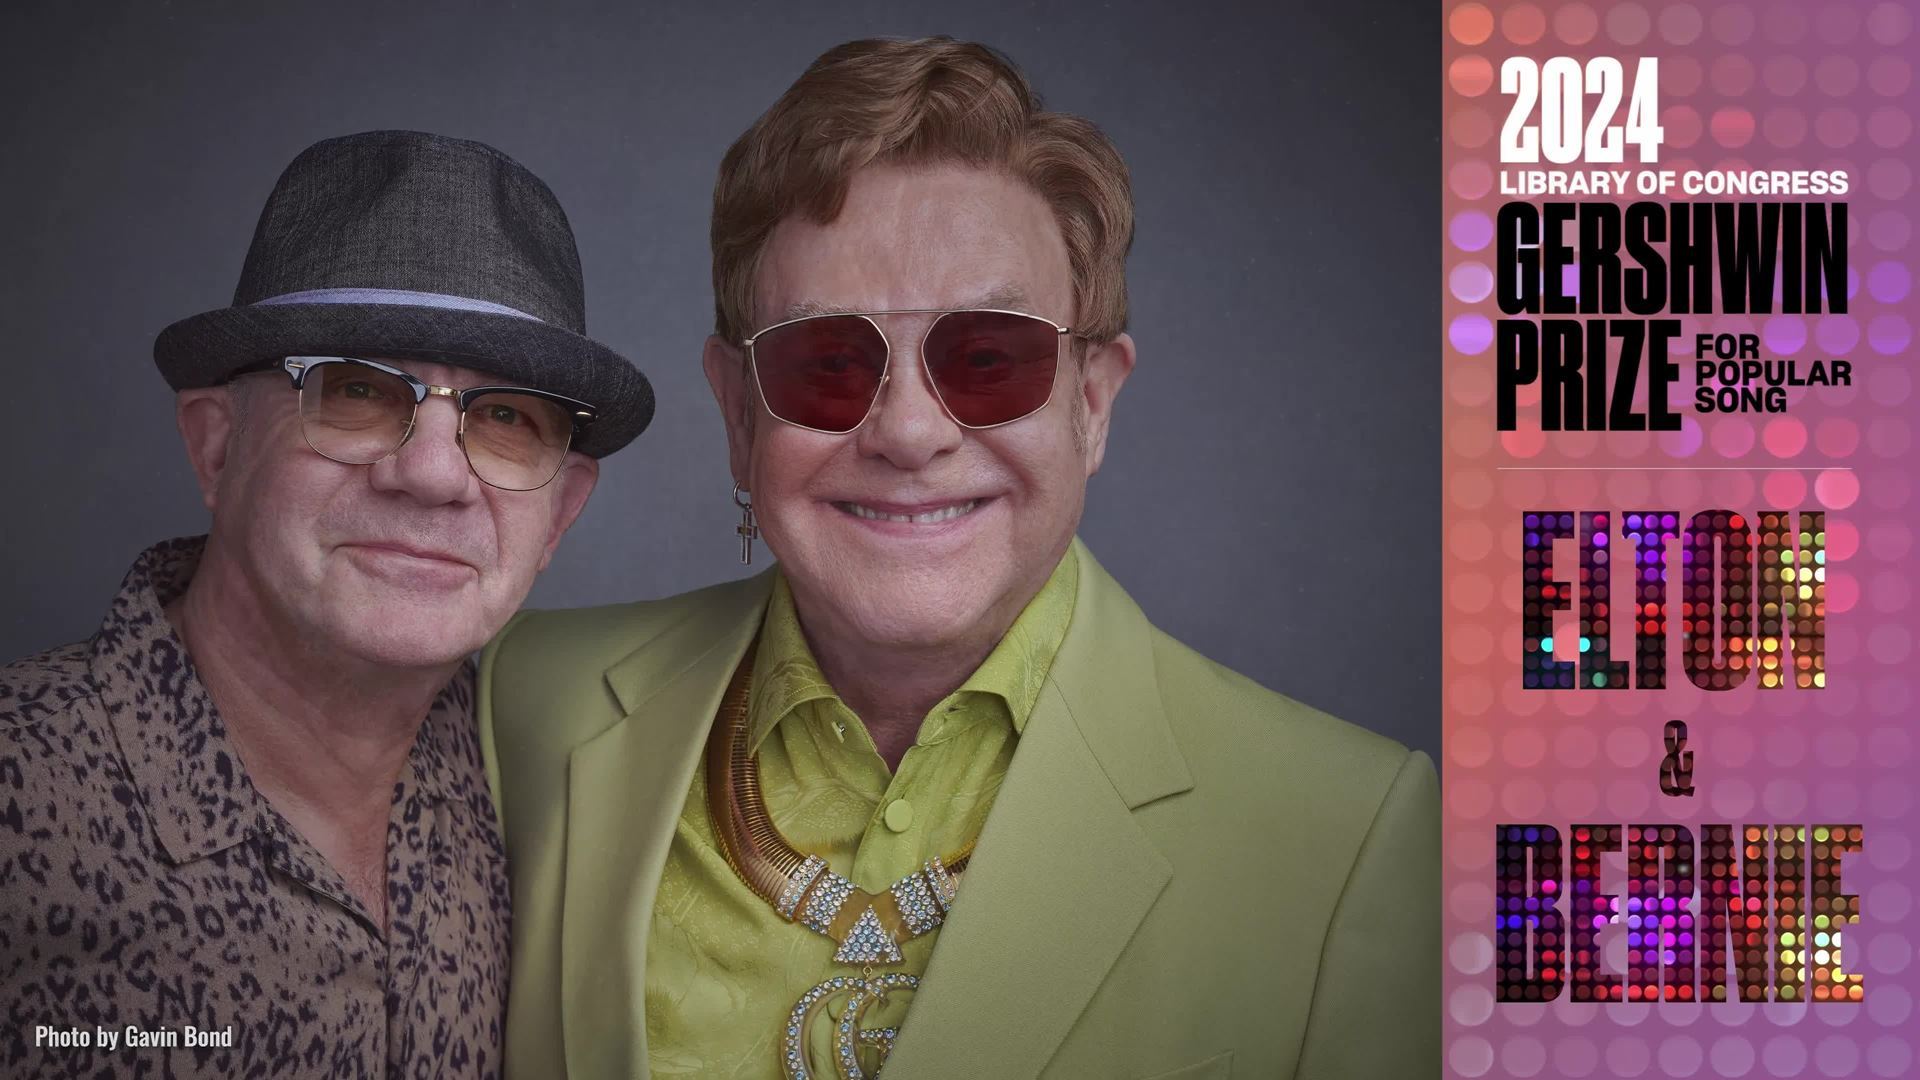 Elton John and Bernie Taupin to Receive the Library of Congress Gershwin Prize for Popular Song